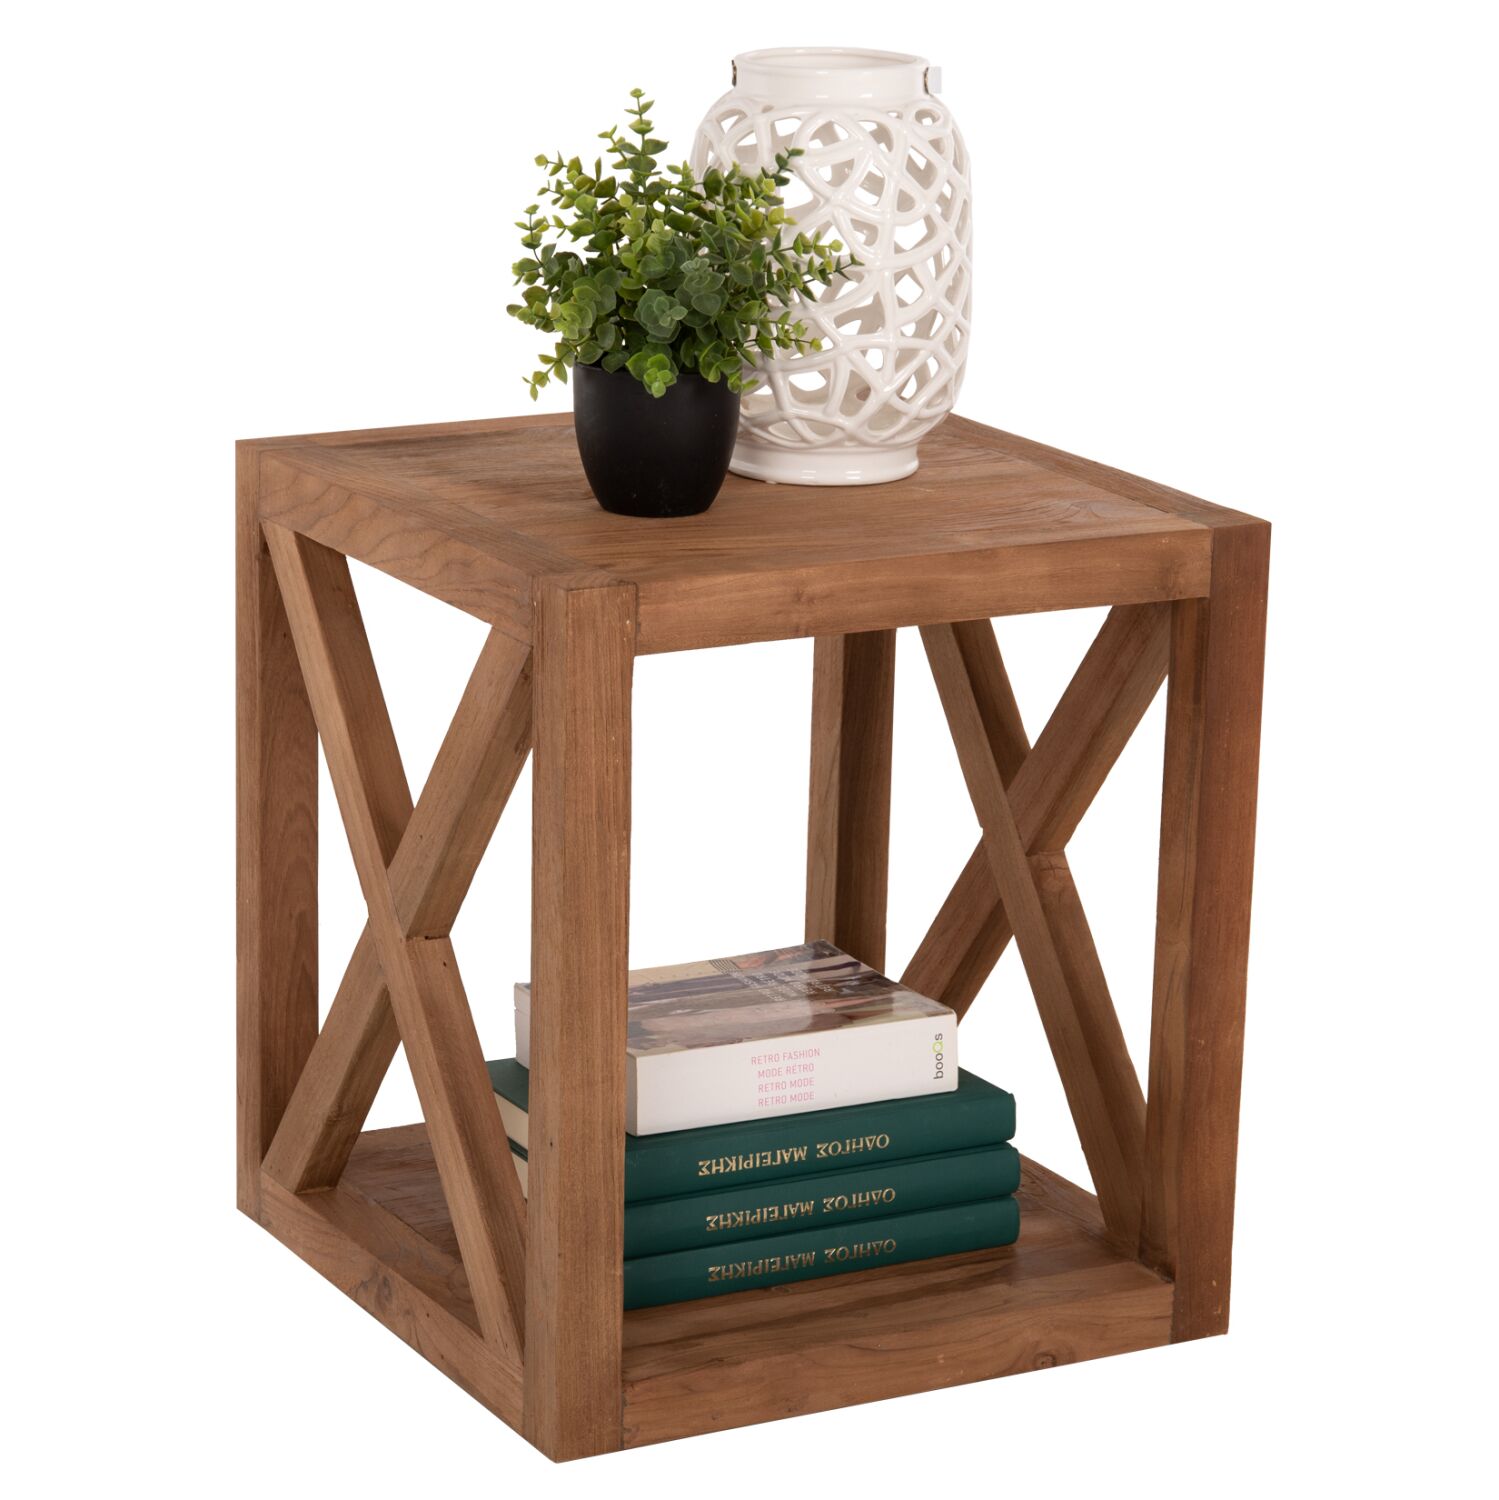 SIDE TABLE HM7941 SQUARE WITH STORAGE SPACE-RECYCLED TEAK WOOD 45x45x51Hcm.